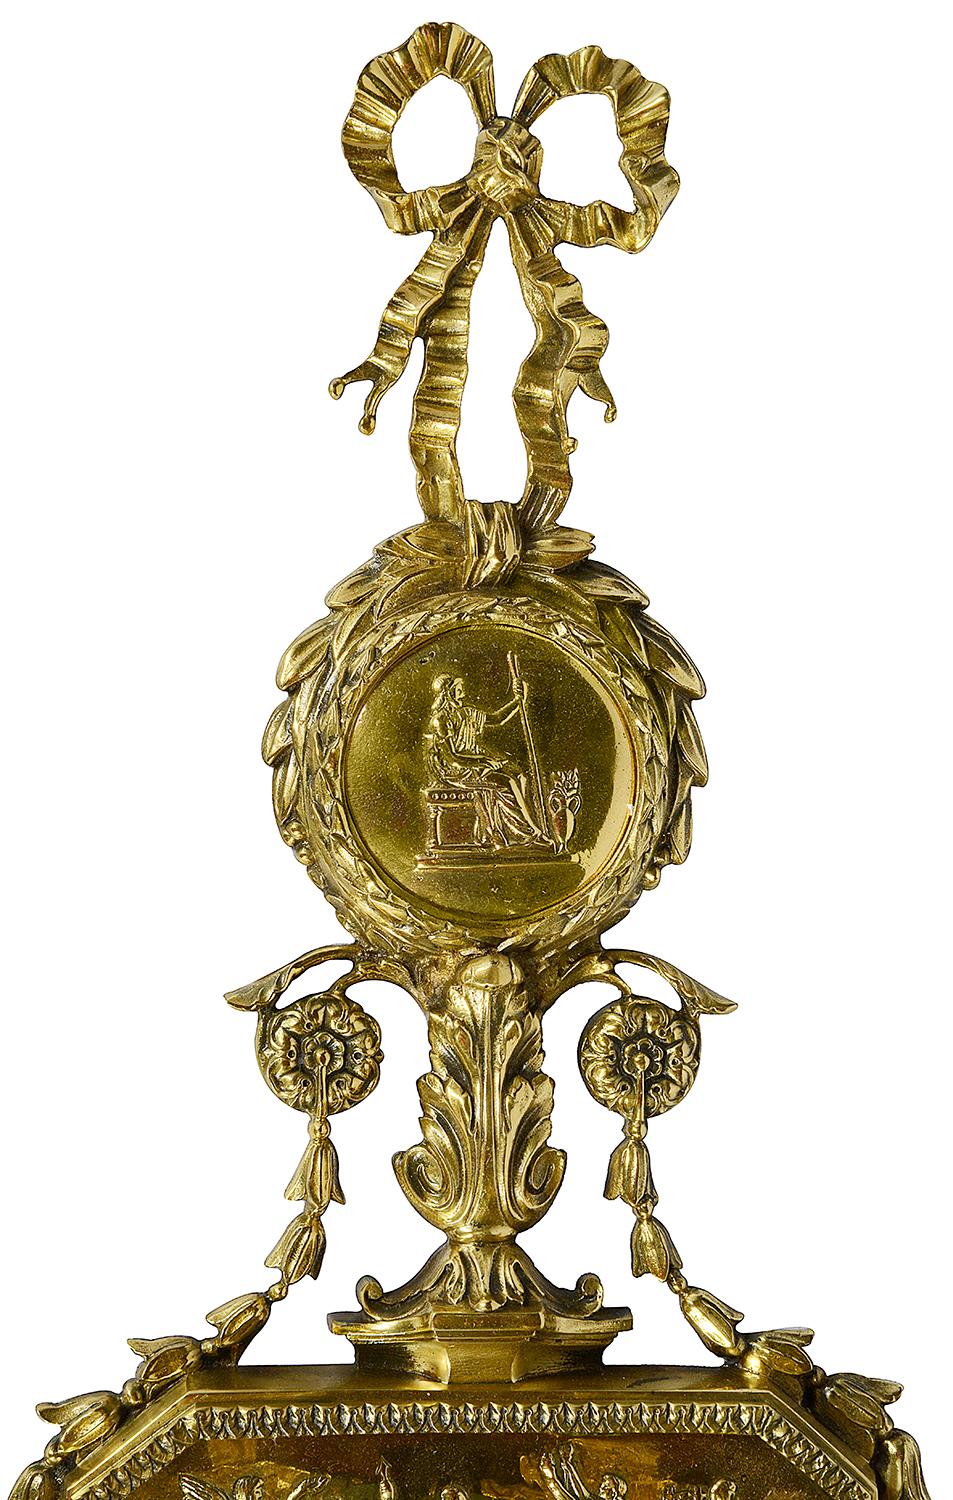 A good quality pair of late 19th century gilded ormolu neoclassical scrolling foliate four branch wall sconces, each with plaques depicting figures in council, motifs, swags and ribbon decoration. Measures: 90cm(35.5